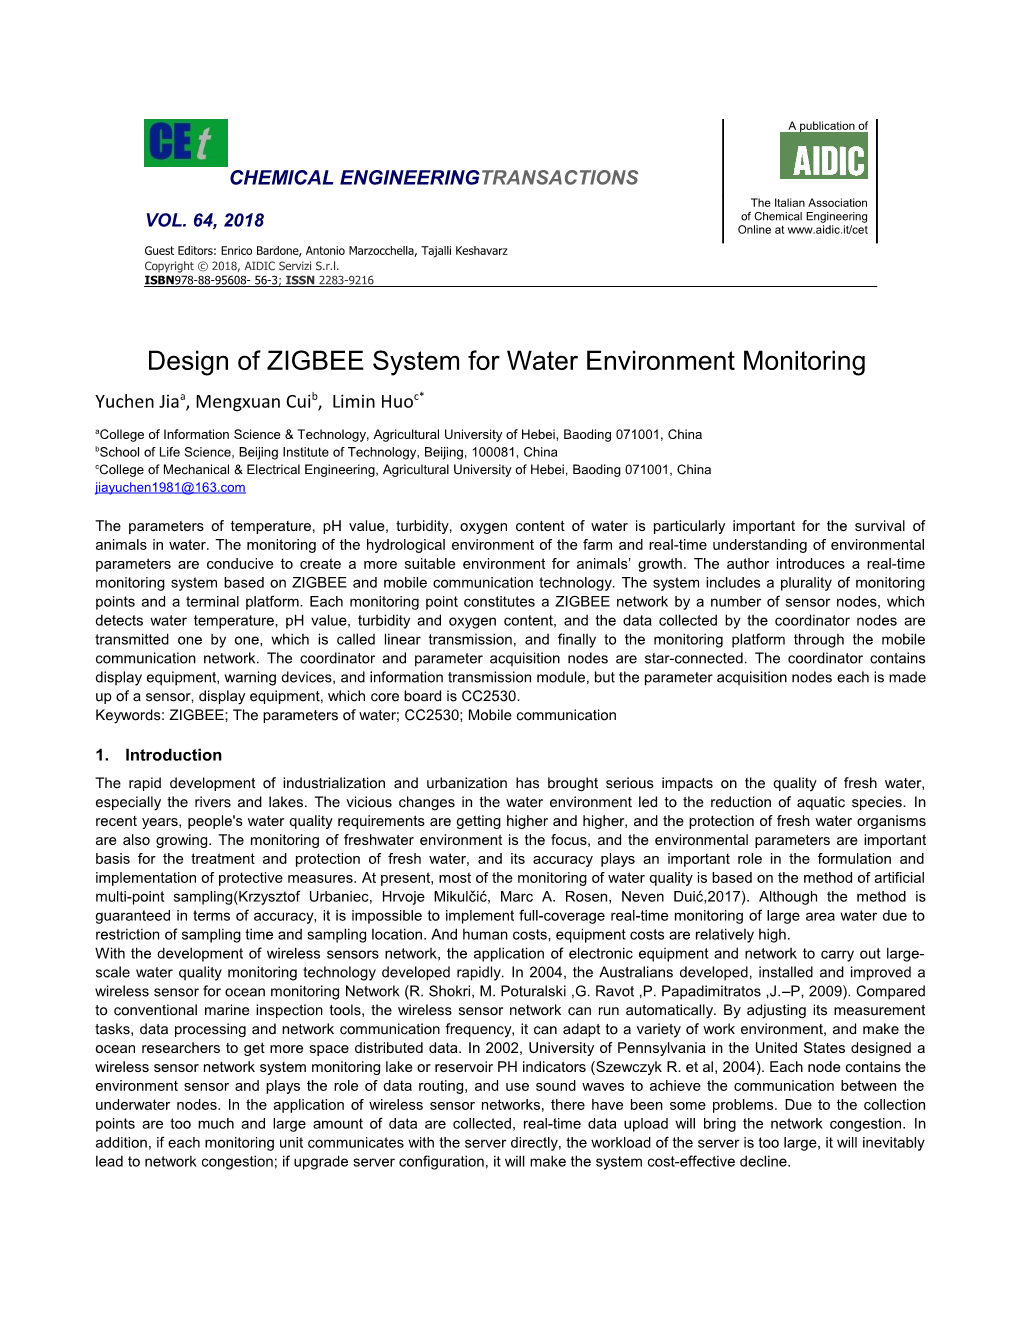 Design of ZIGBEE System for Water Environment Monitoring